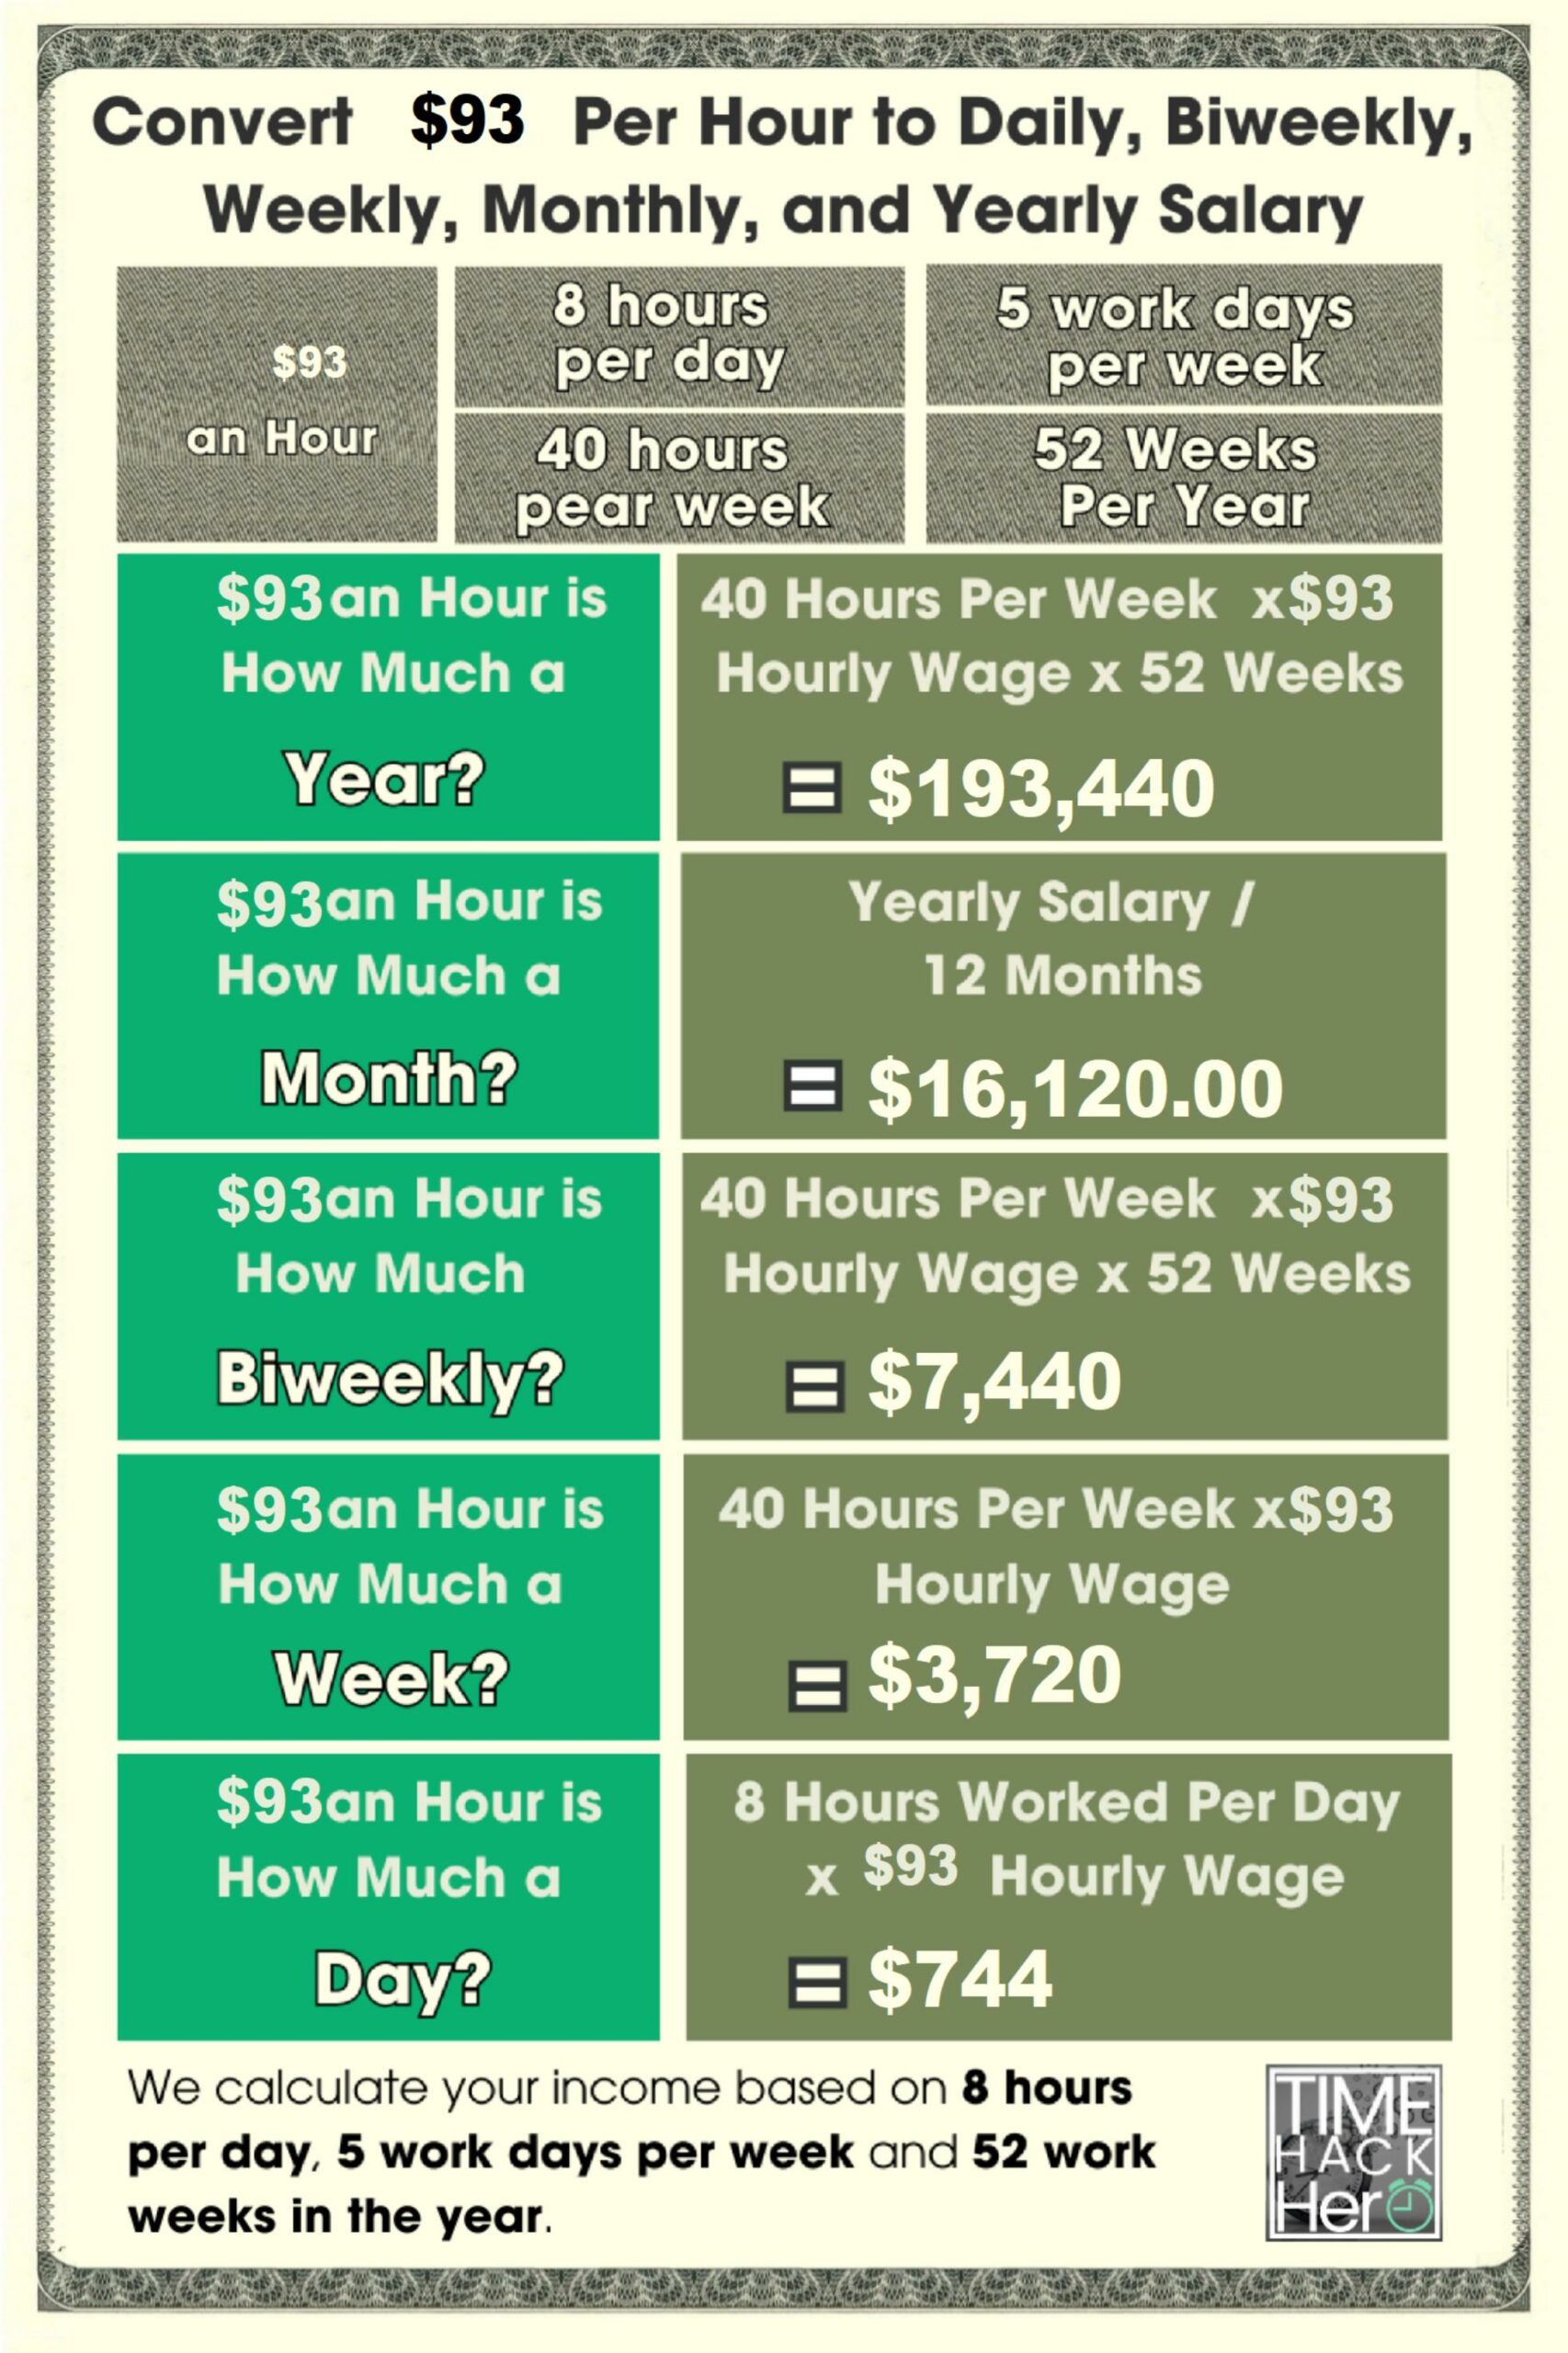 Convert $93.00 Per Hour to Weekly, Monthly, and Yearly Salary